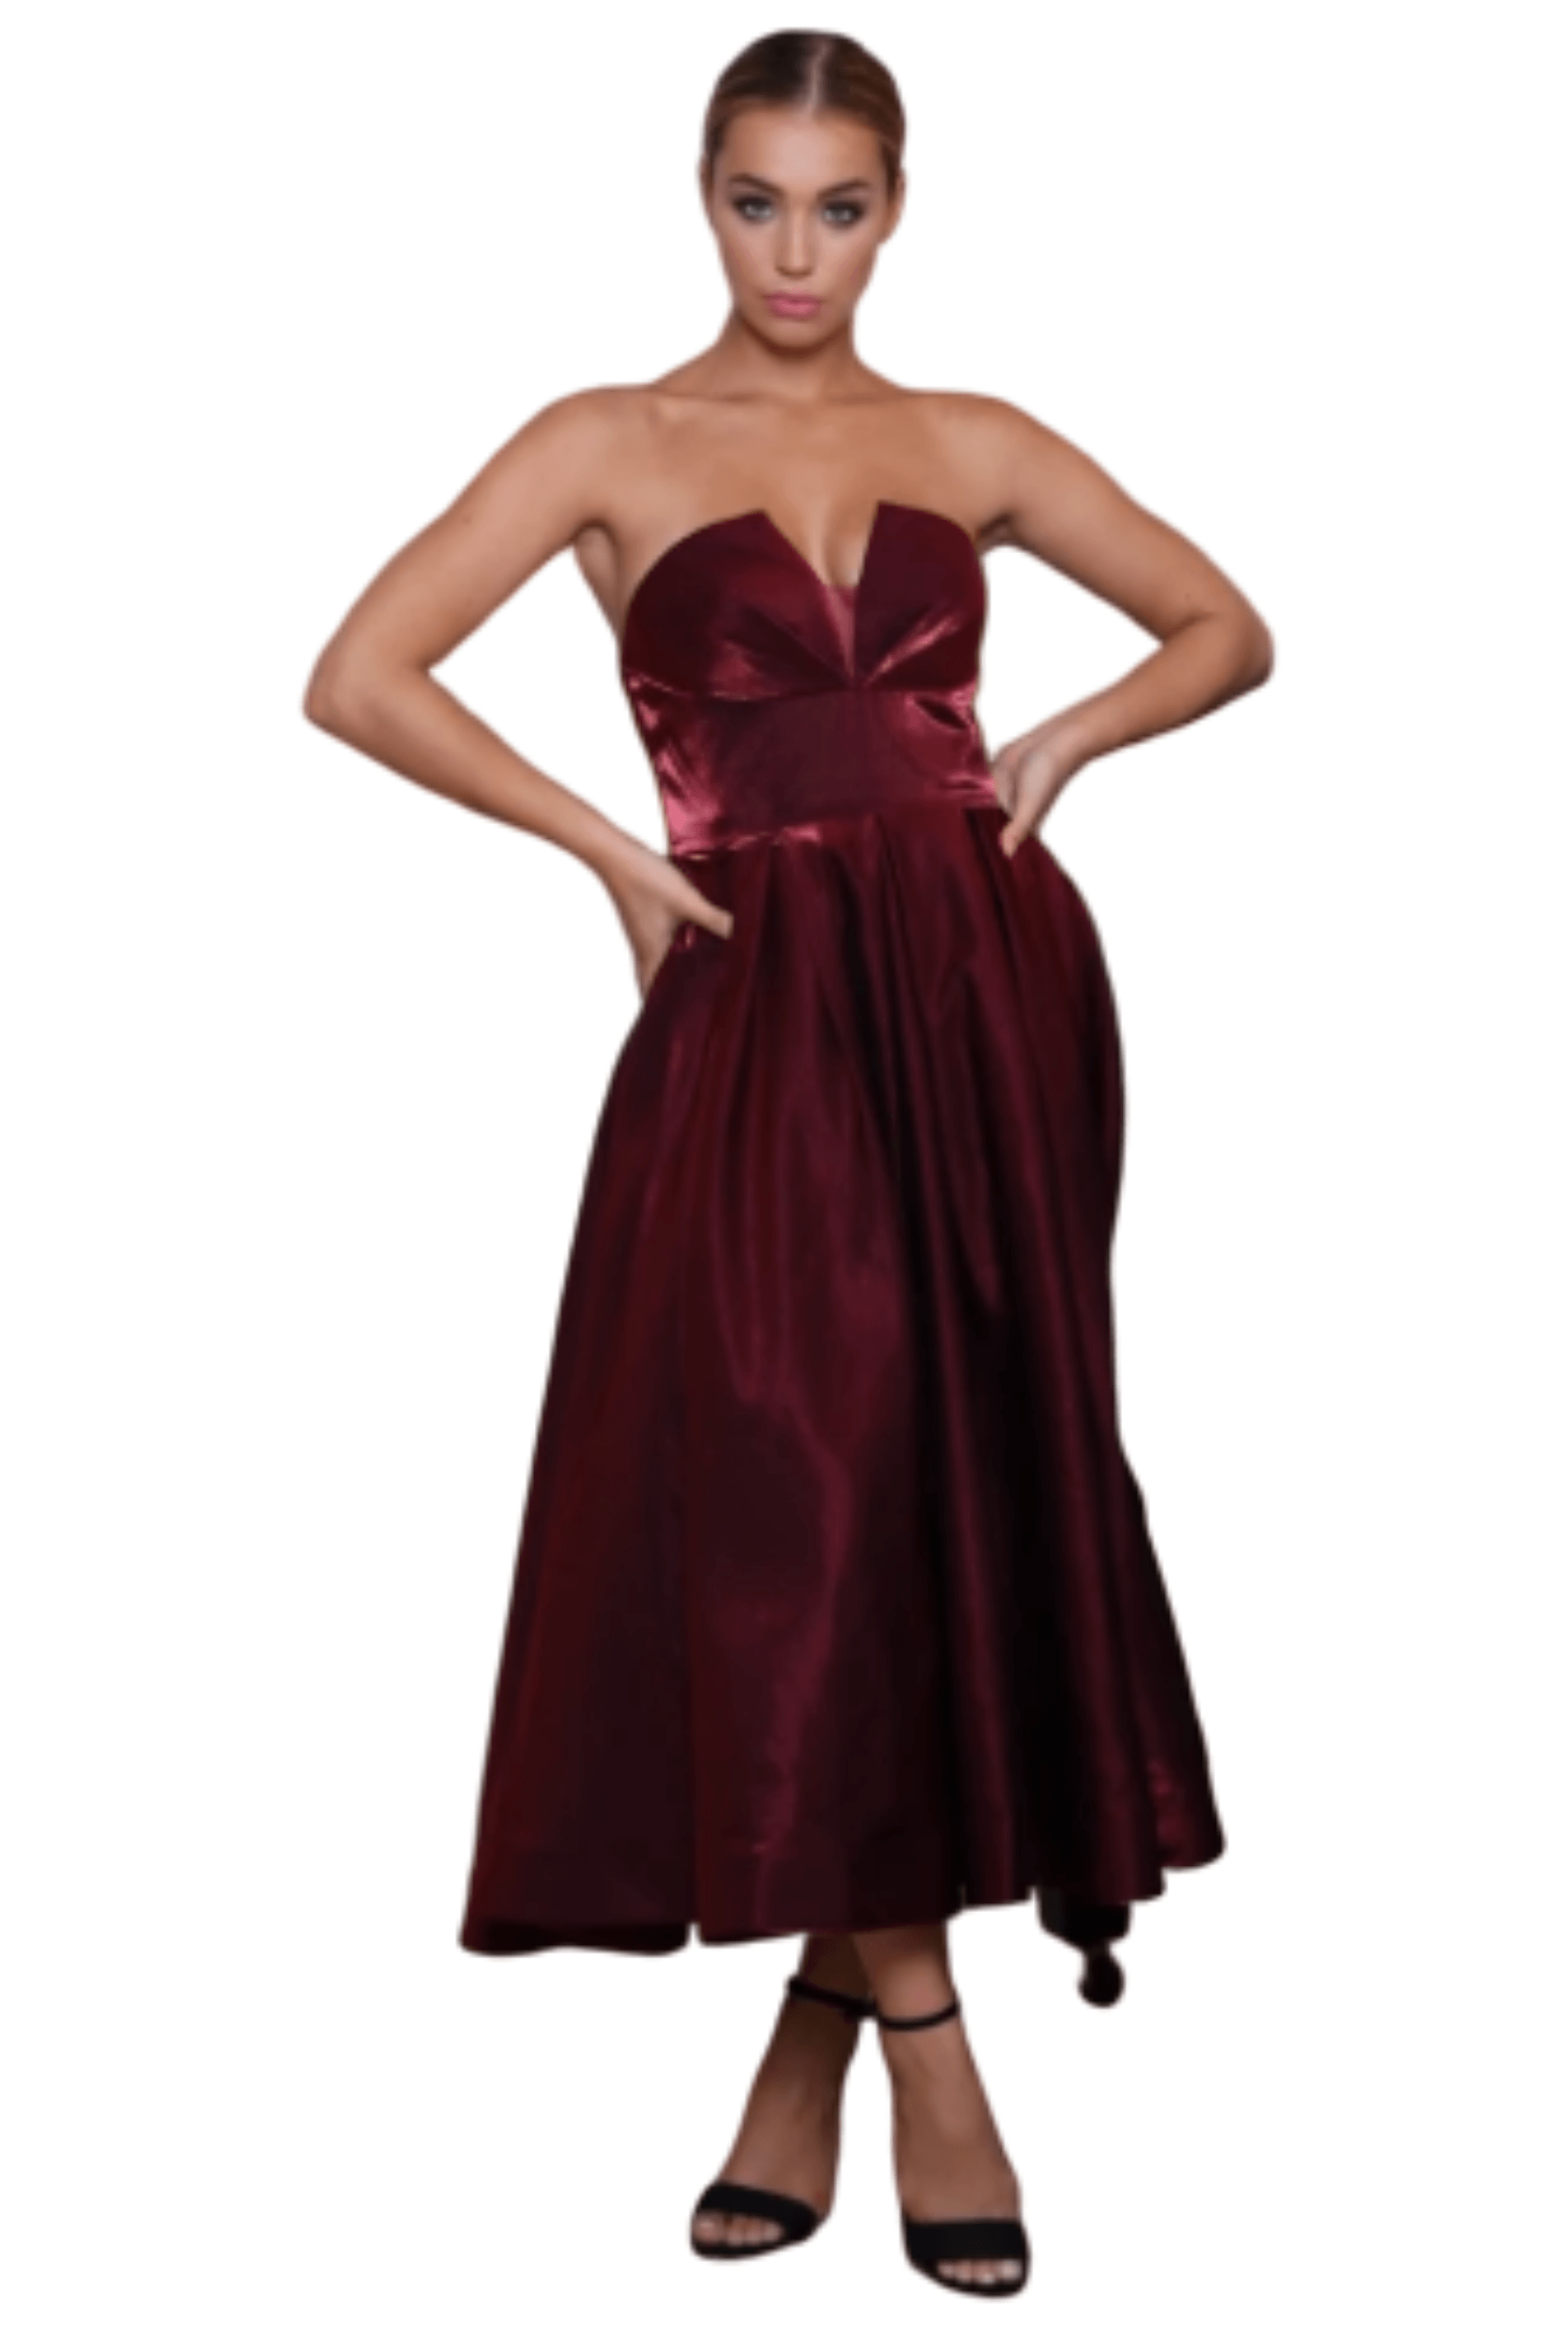 Tinaholy TINAHOLY Madame Dress TA625 (Berry Red)- RRP $380 - tinaholy-madame-dress-ta625-berry-red--rrp-0-dress-for-a-night-30756961.png